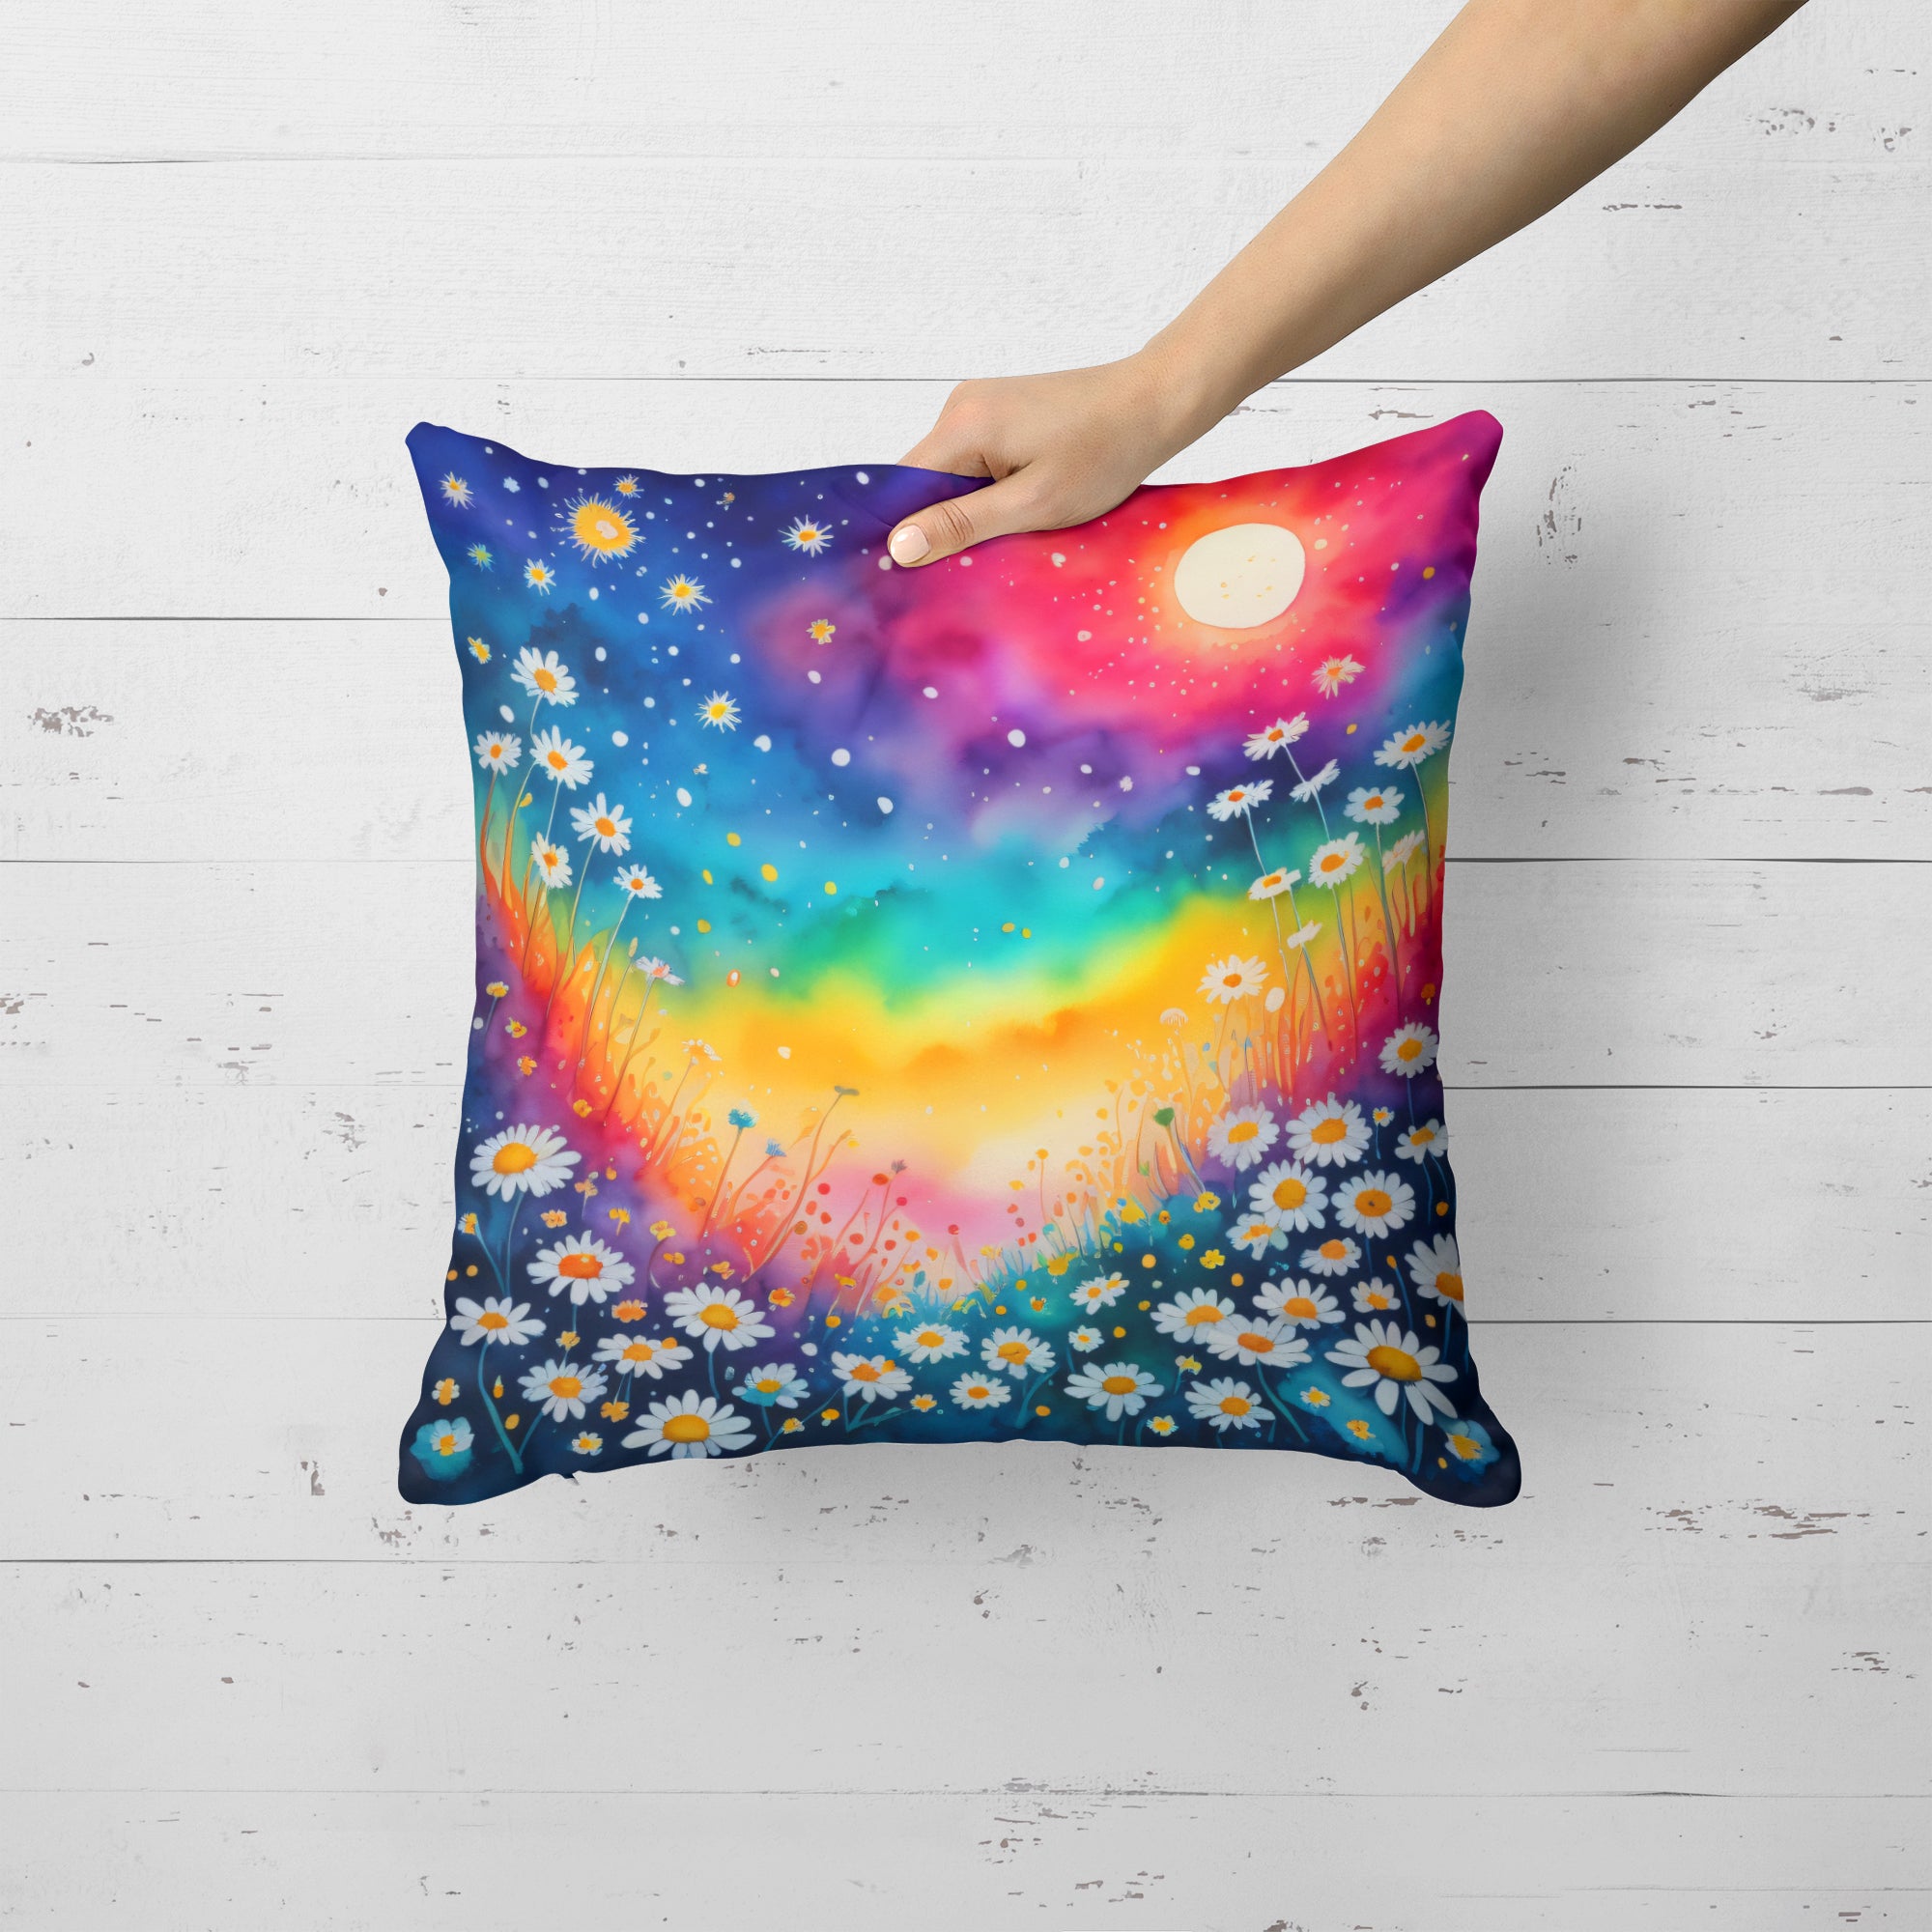 Buy this Colorful Daisies Fabric Decorative Pillow